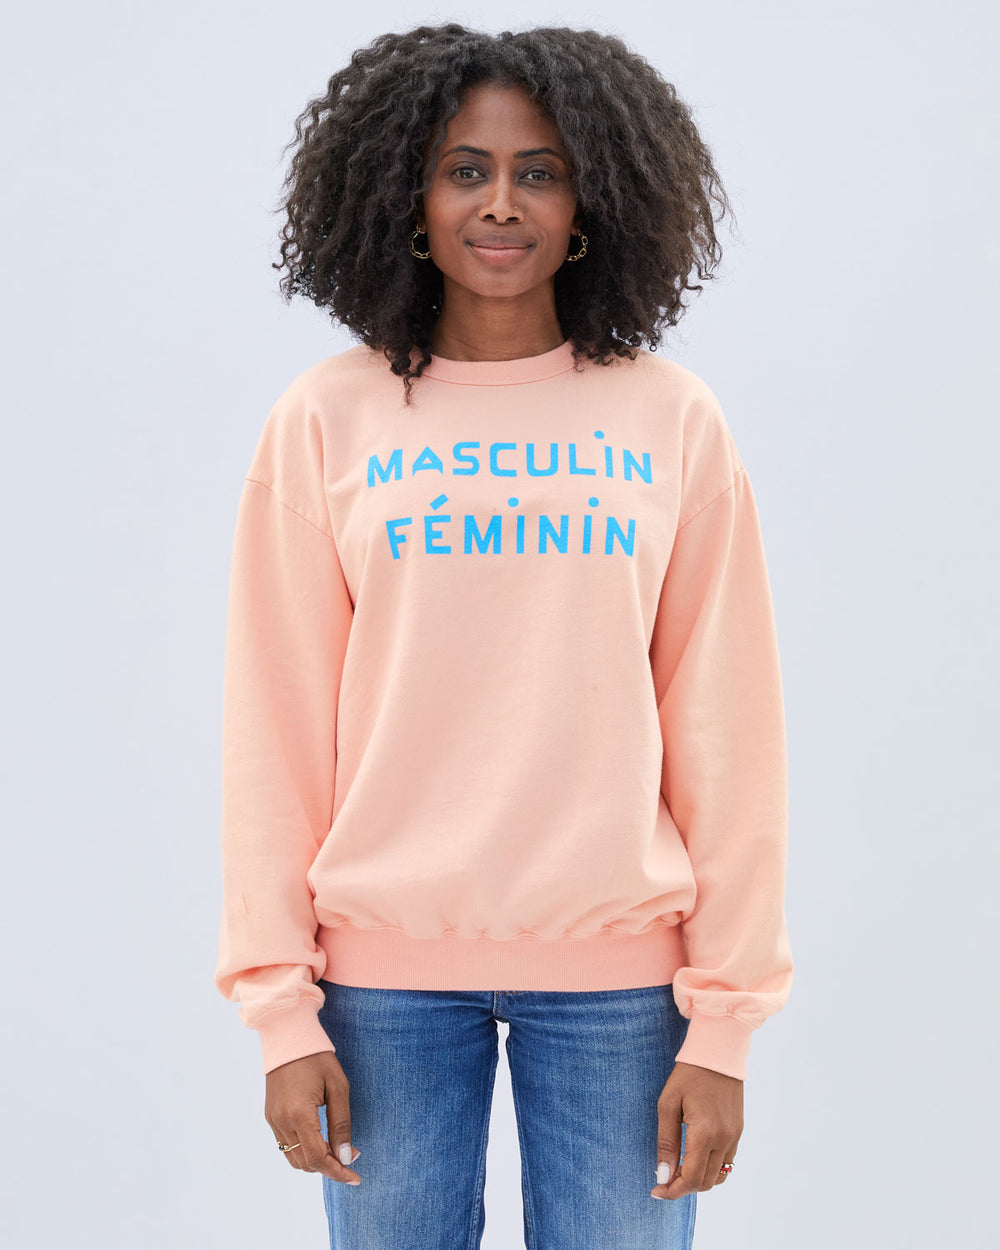 Mecca wearing the  Coral with Light Blue Masculin Feminin Oversized Sweatshirt untucked with blue denim jeans